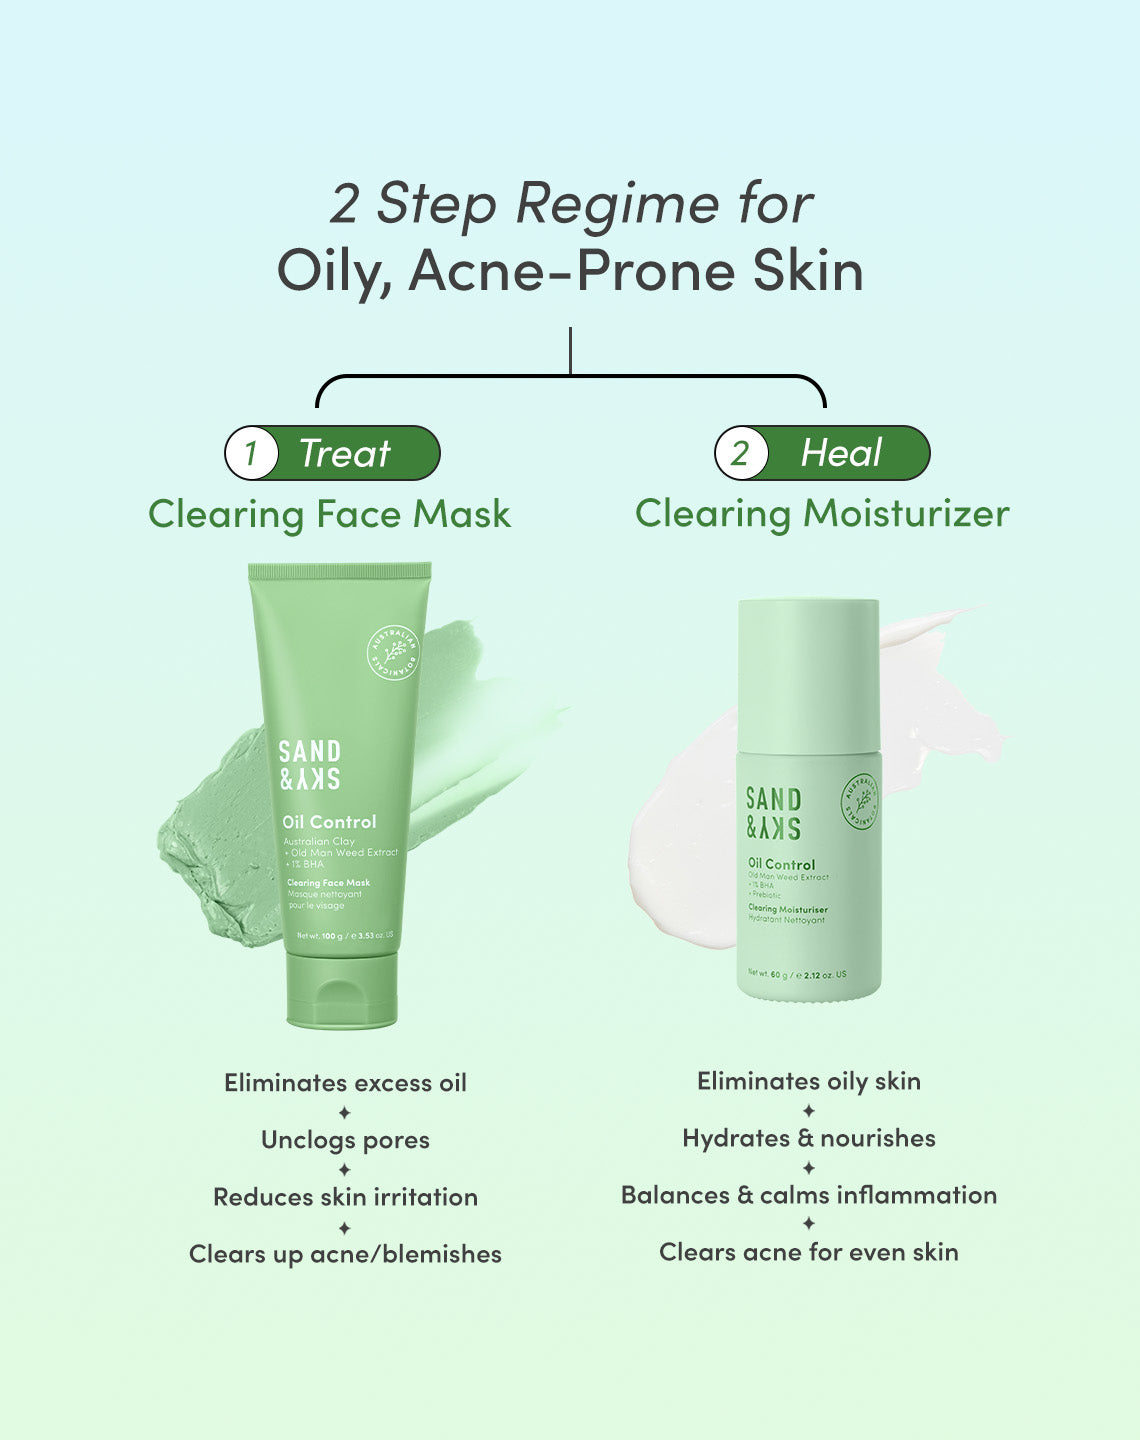 Oil Control Clearing Moisturizer